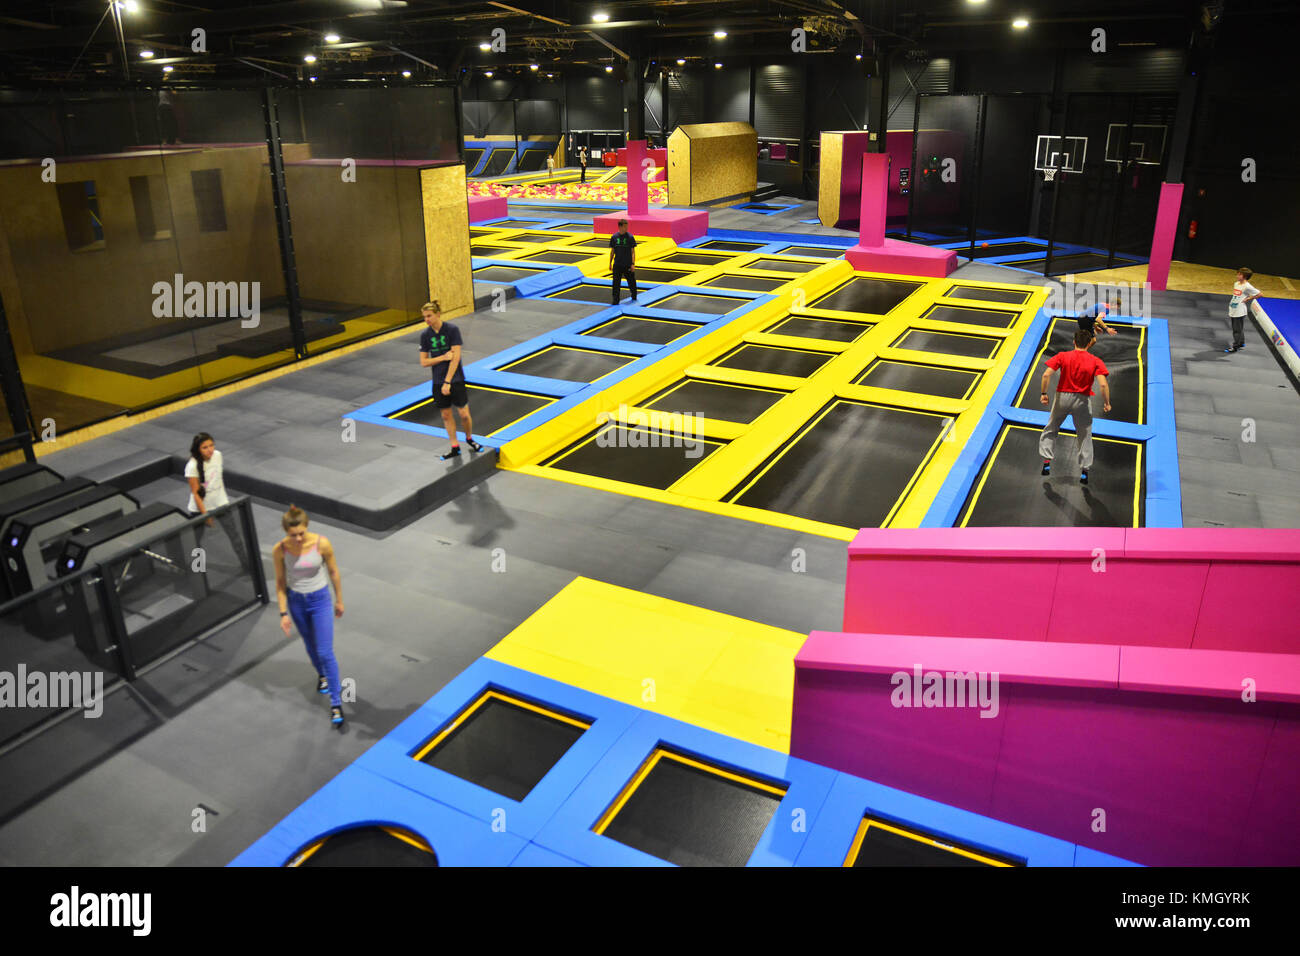 Ljubljana. 7th Dec, 2017. Photo taken on Dec. 7, 2017 shows a view of WOOP  Trampoline Park in Ljubljana, Slovenia. Covering an area of 3,500 square  meters, the Park has more than